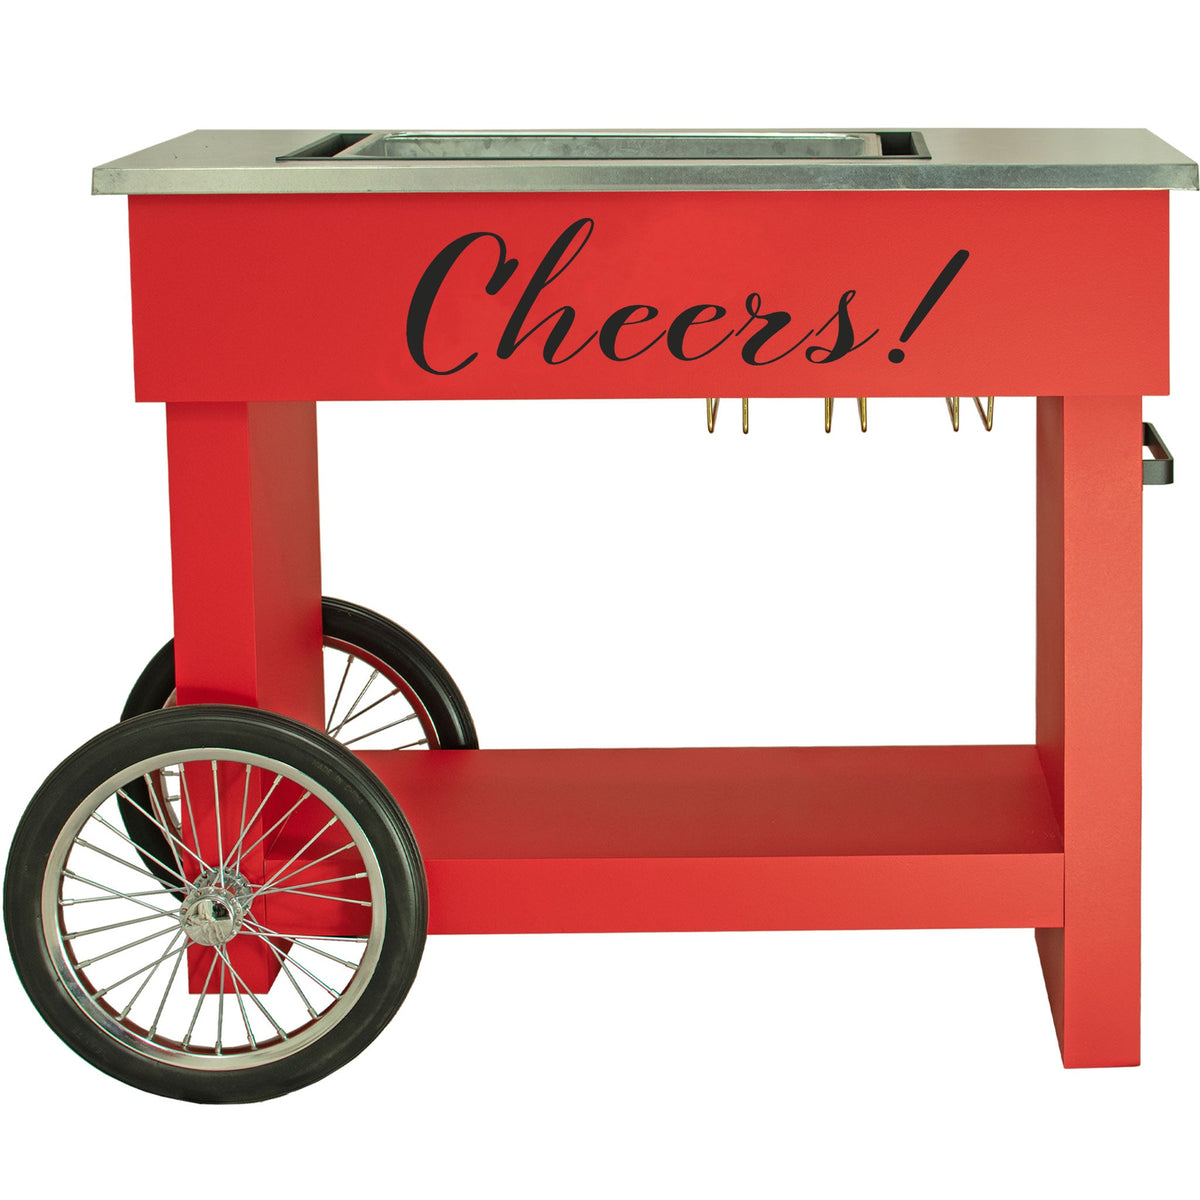 Lee Display's Champagne and Wine Bar Cart with Wheels in Red Color and a Cheers! Decal